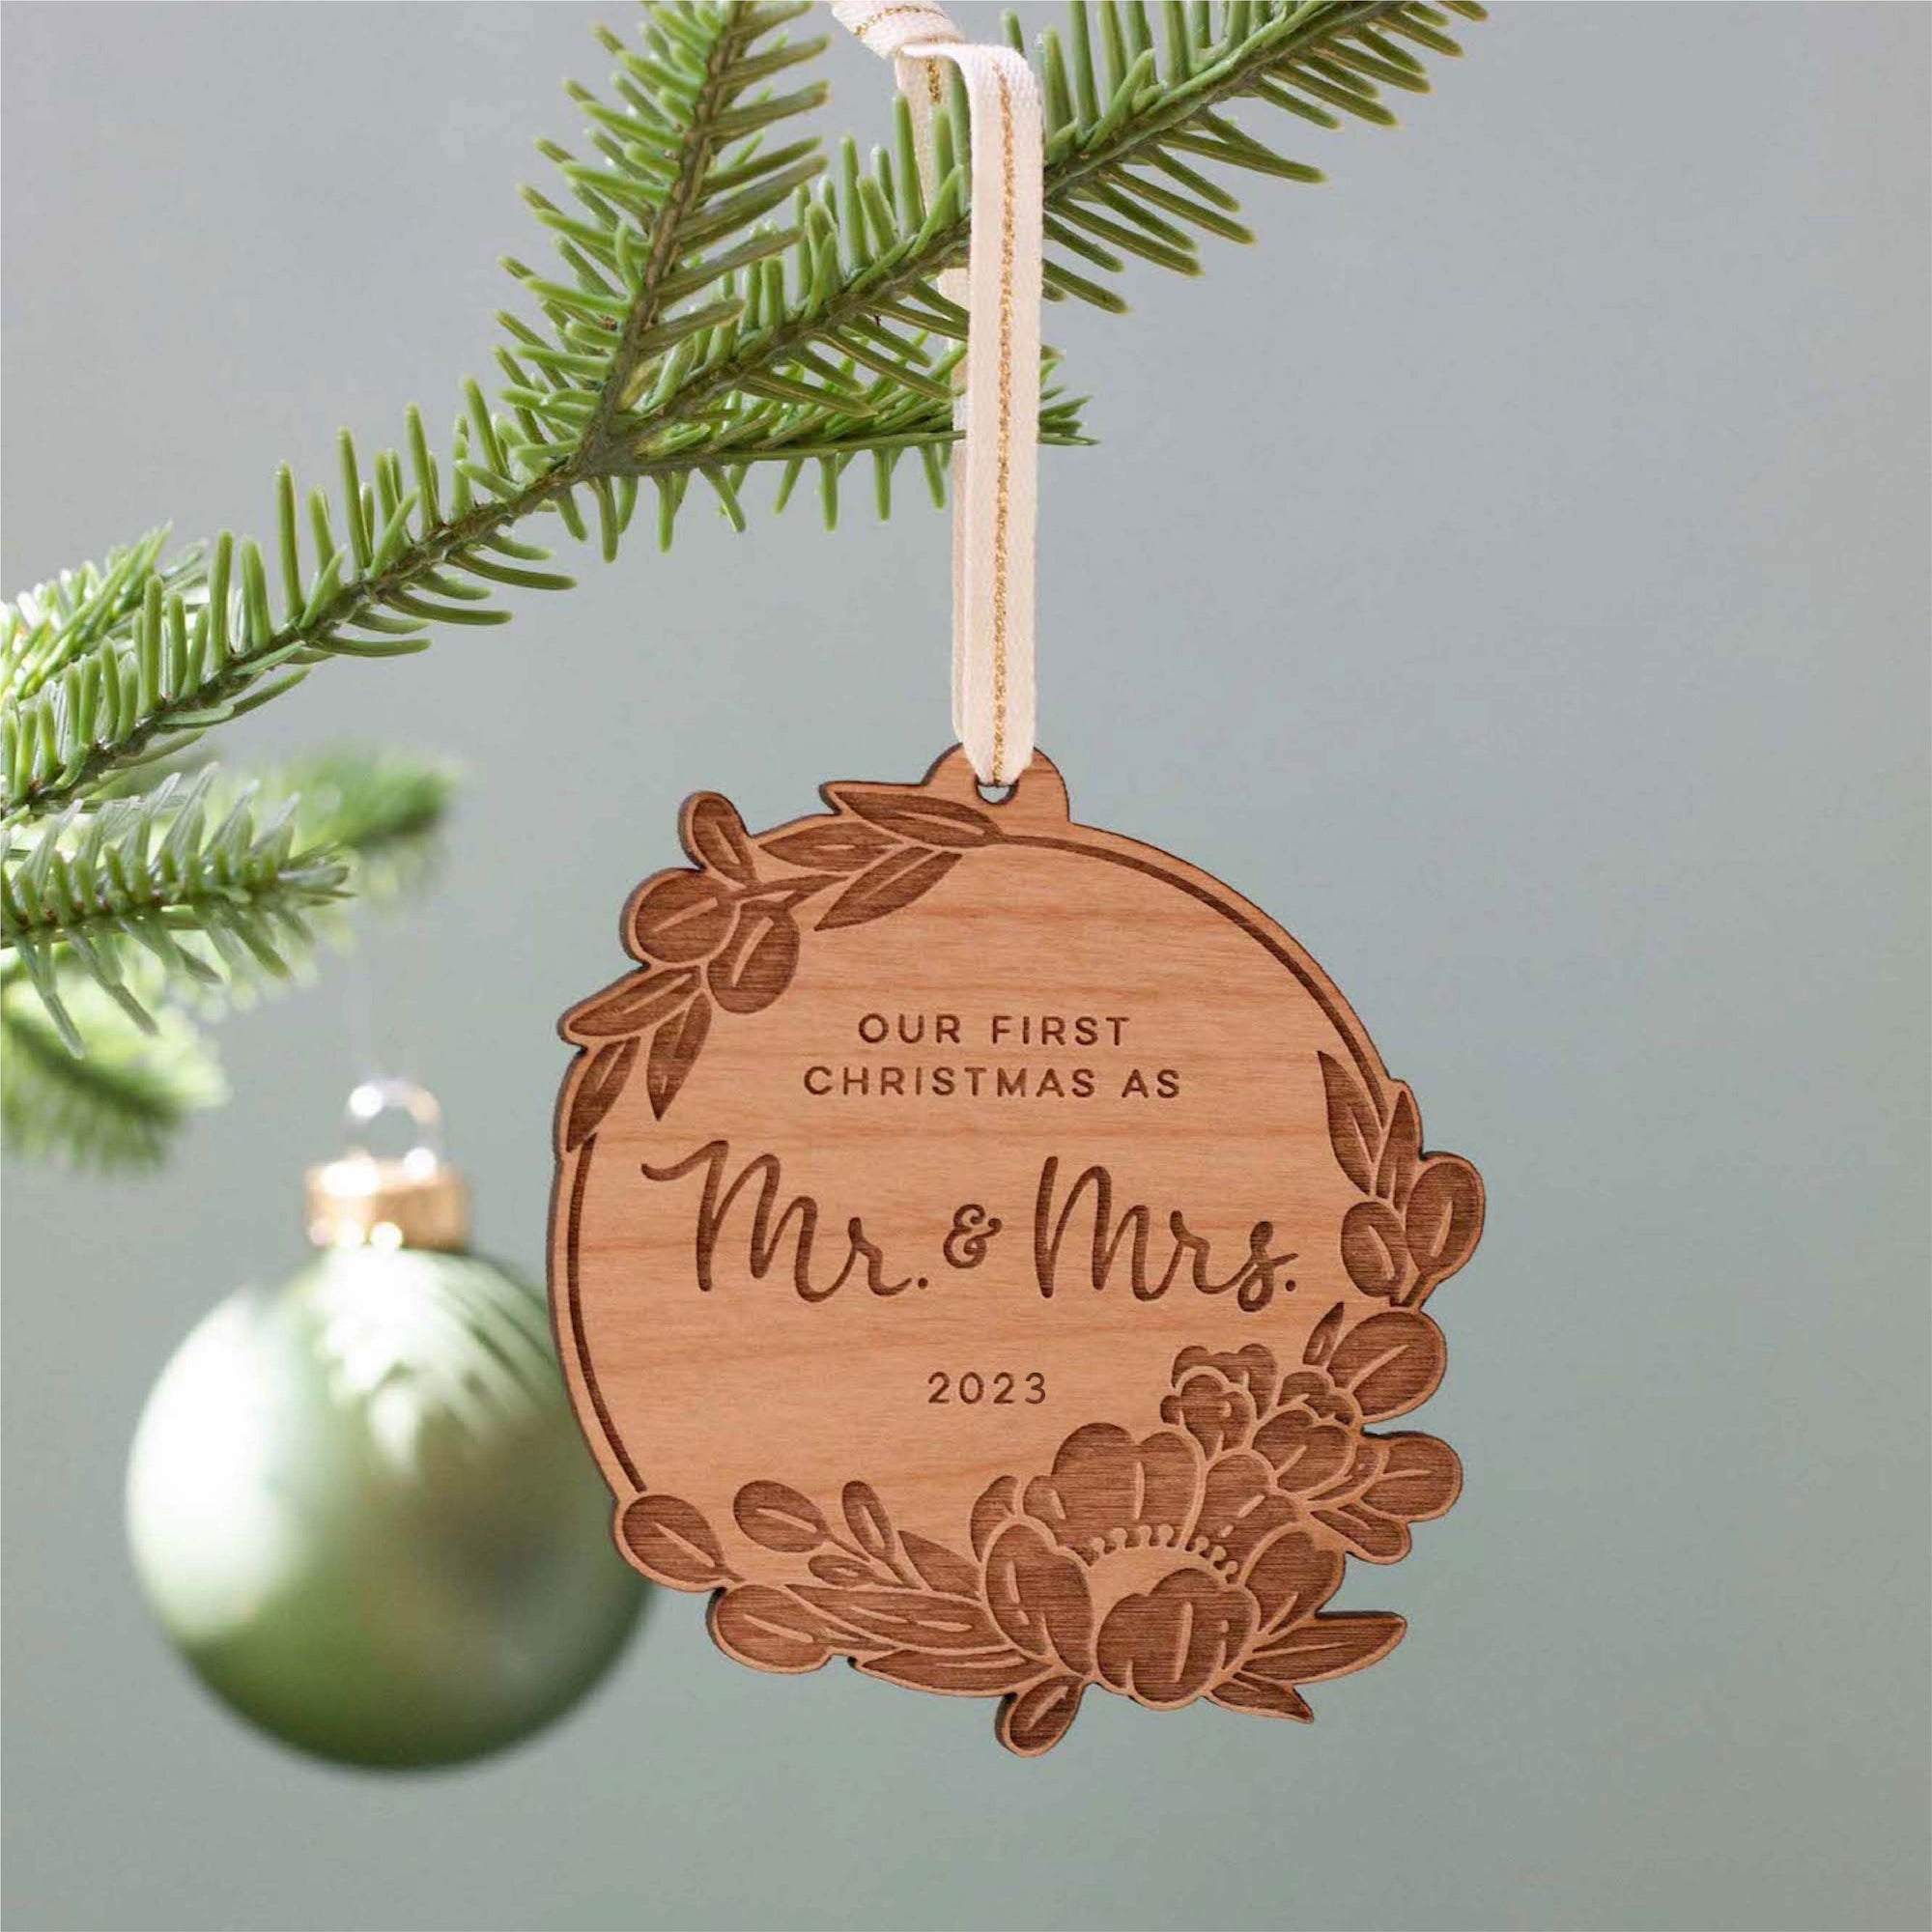 Our First Christmas As Mr. And Mrs. 2023 Ornament